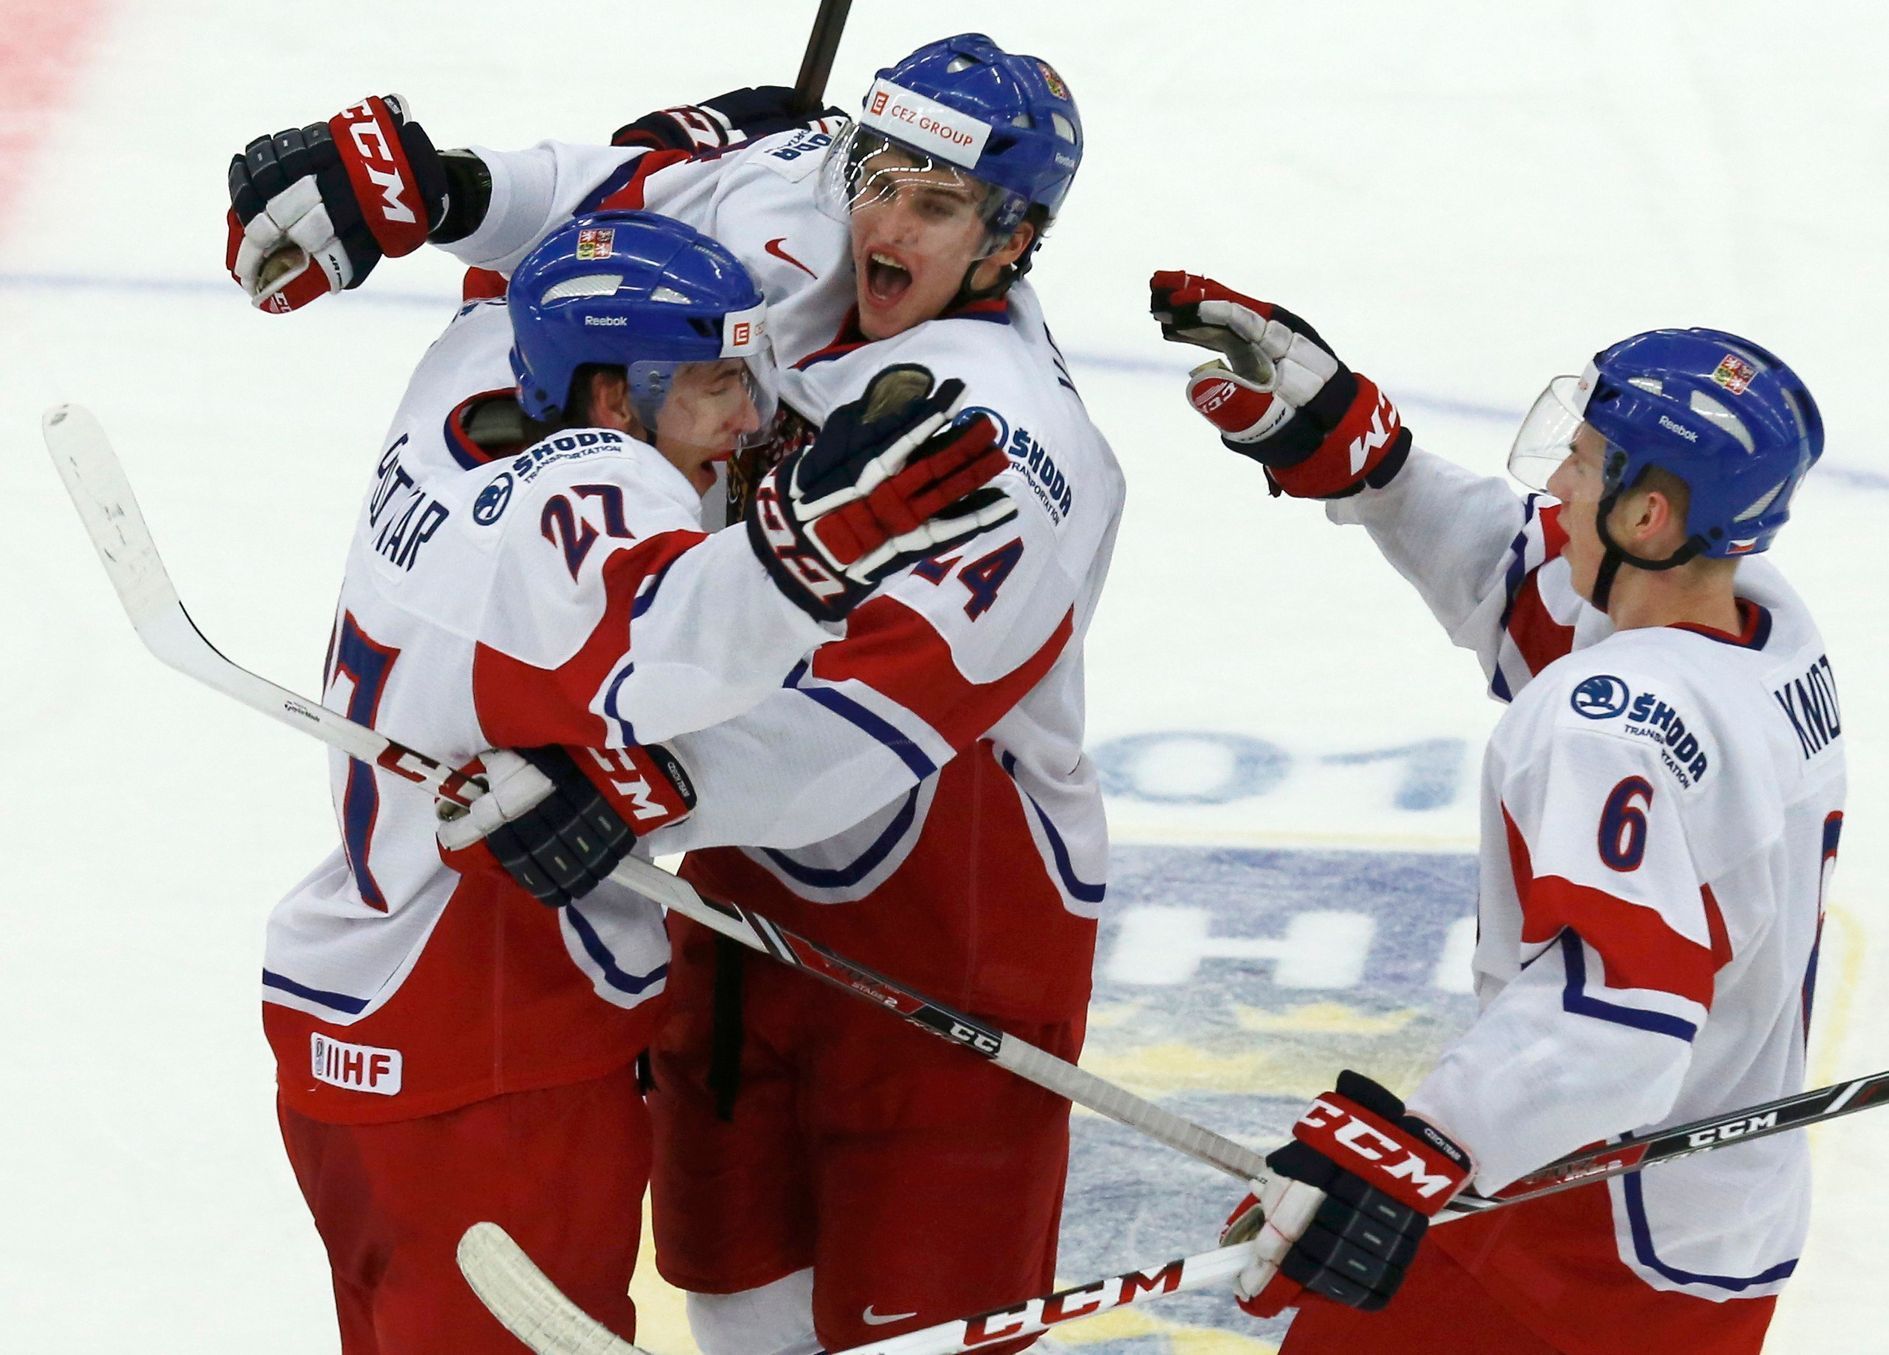 Czech Republic's Plutnar celebrates his goal against Canada with teammates Vrana and Knot during the second period of their IIHF World Junior Championship ice hockey game in Malmo